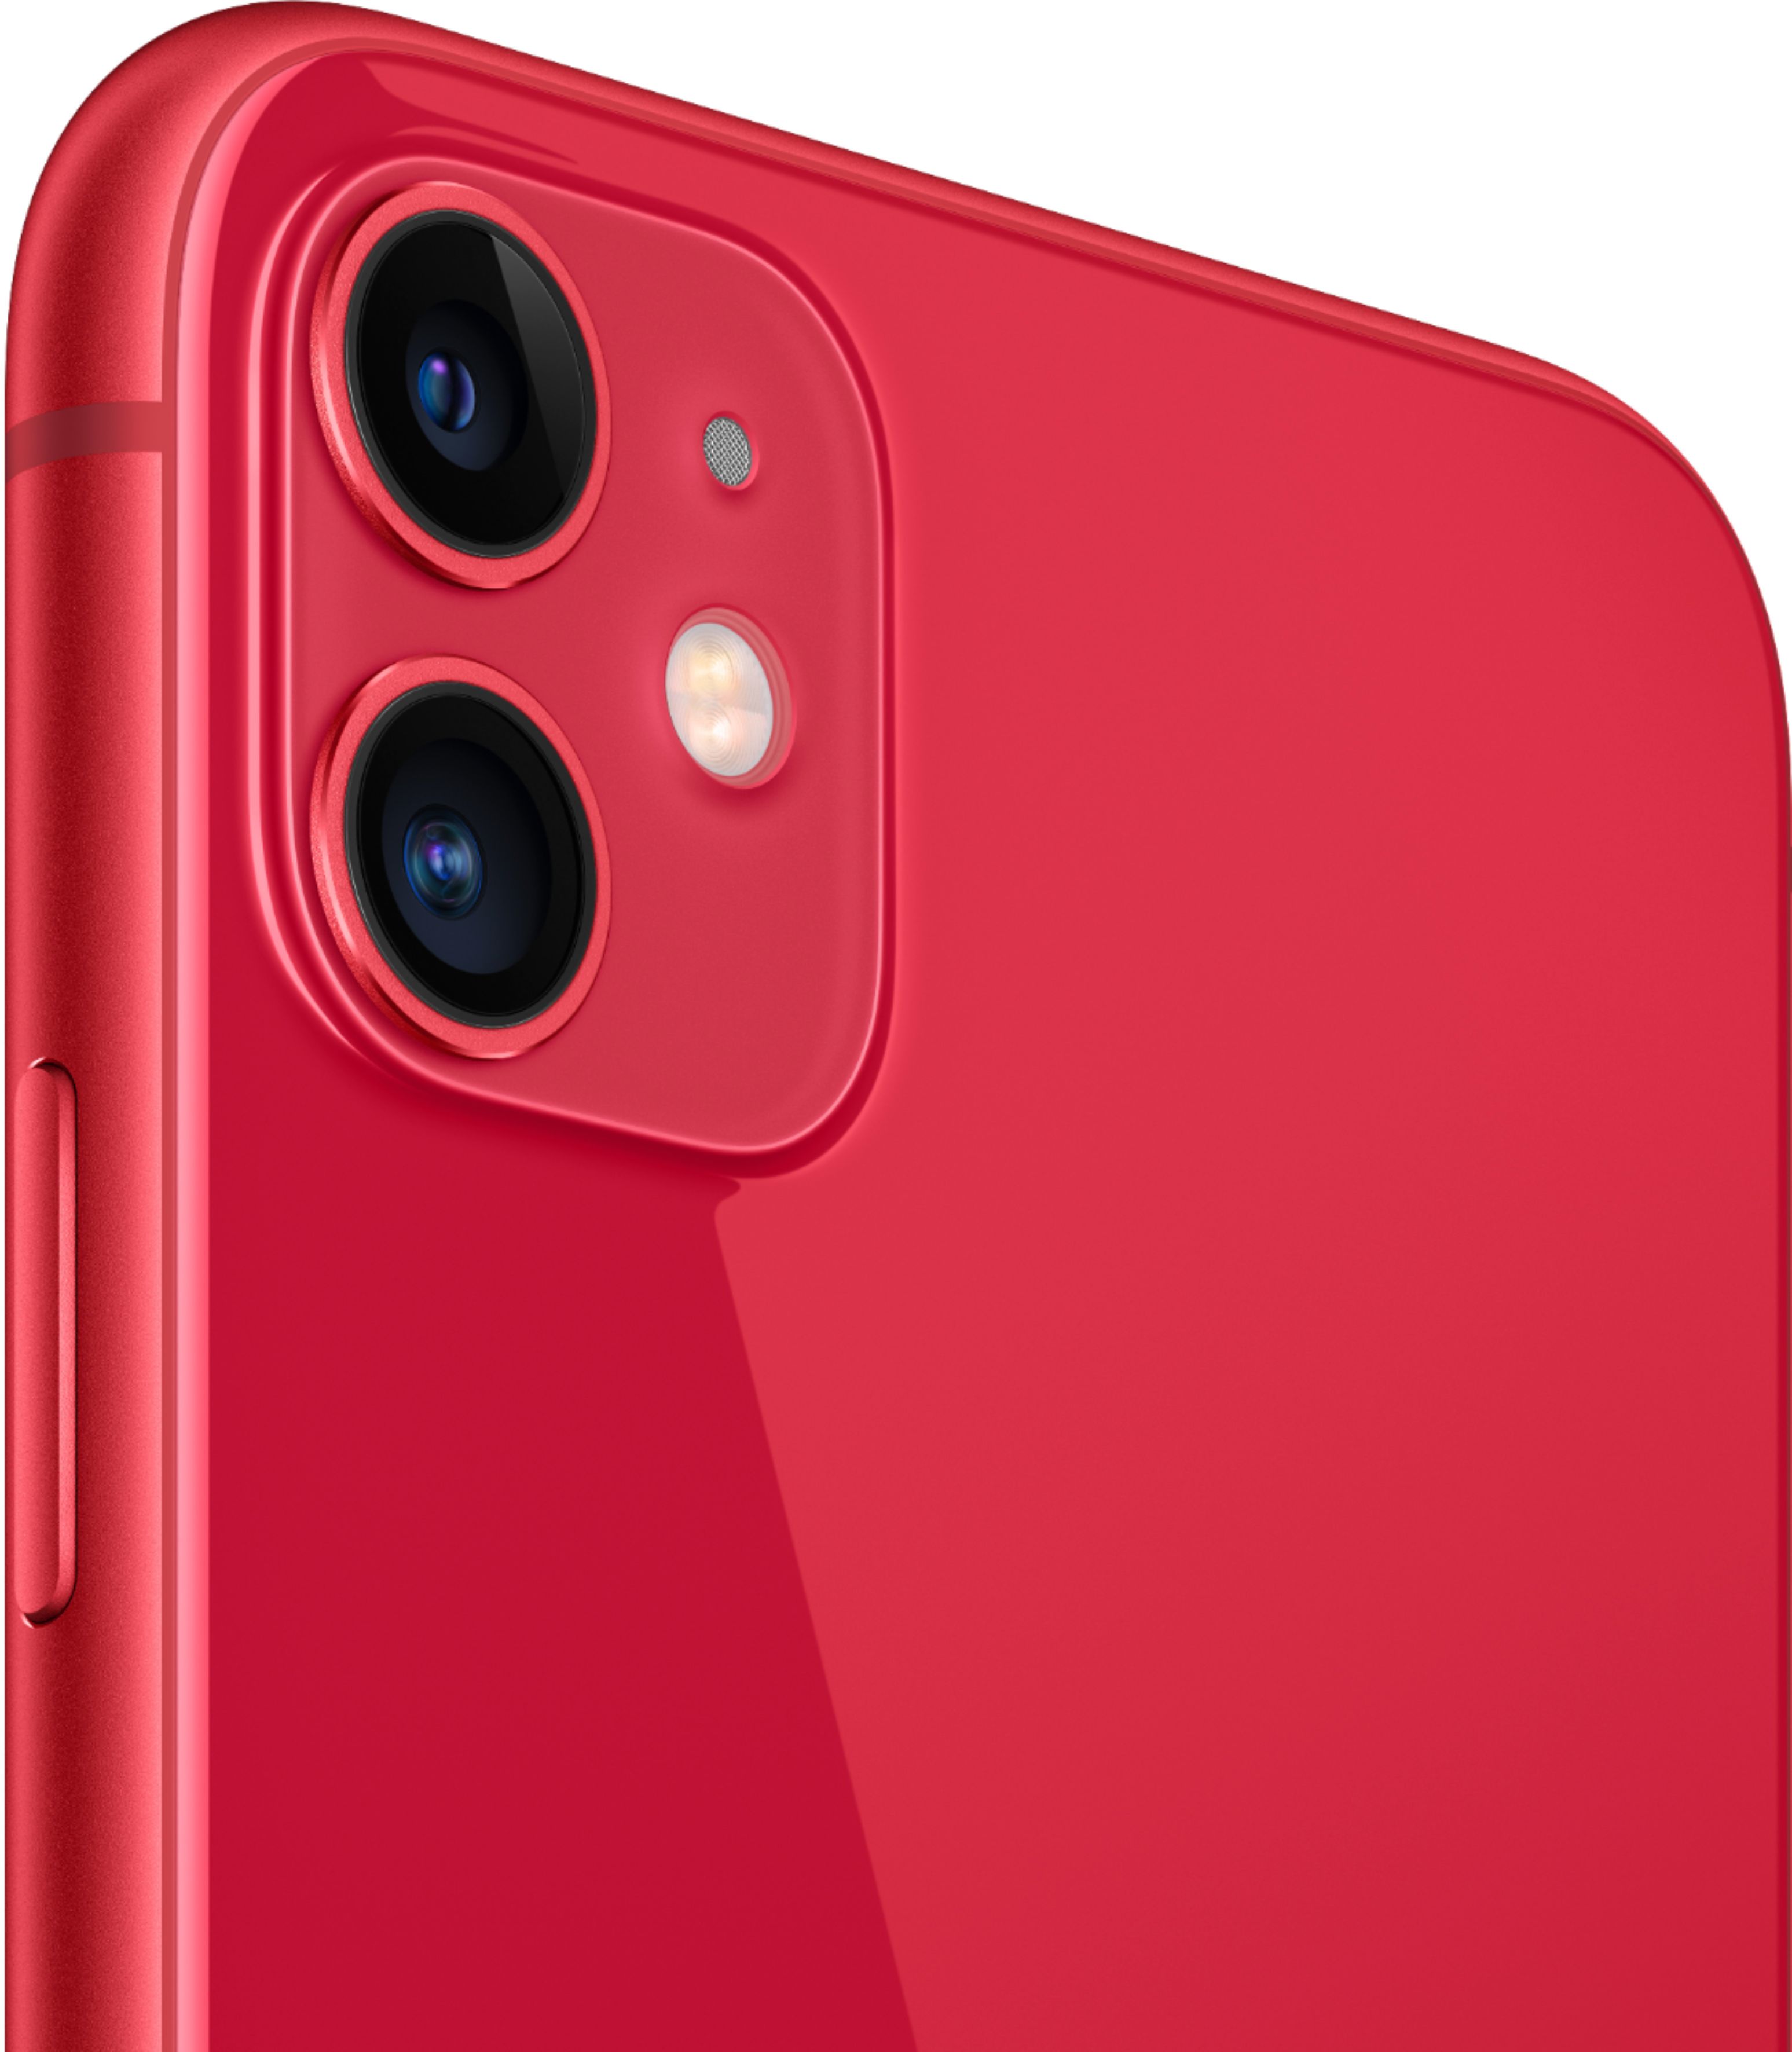 Best Buy: Apple iPhone 11 128GB (PRODUCT)RED (AT&T) MWLG2LL/A